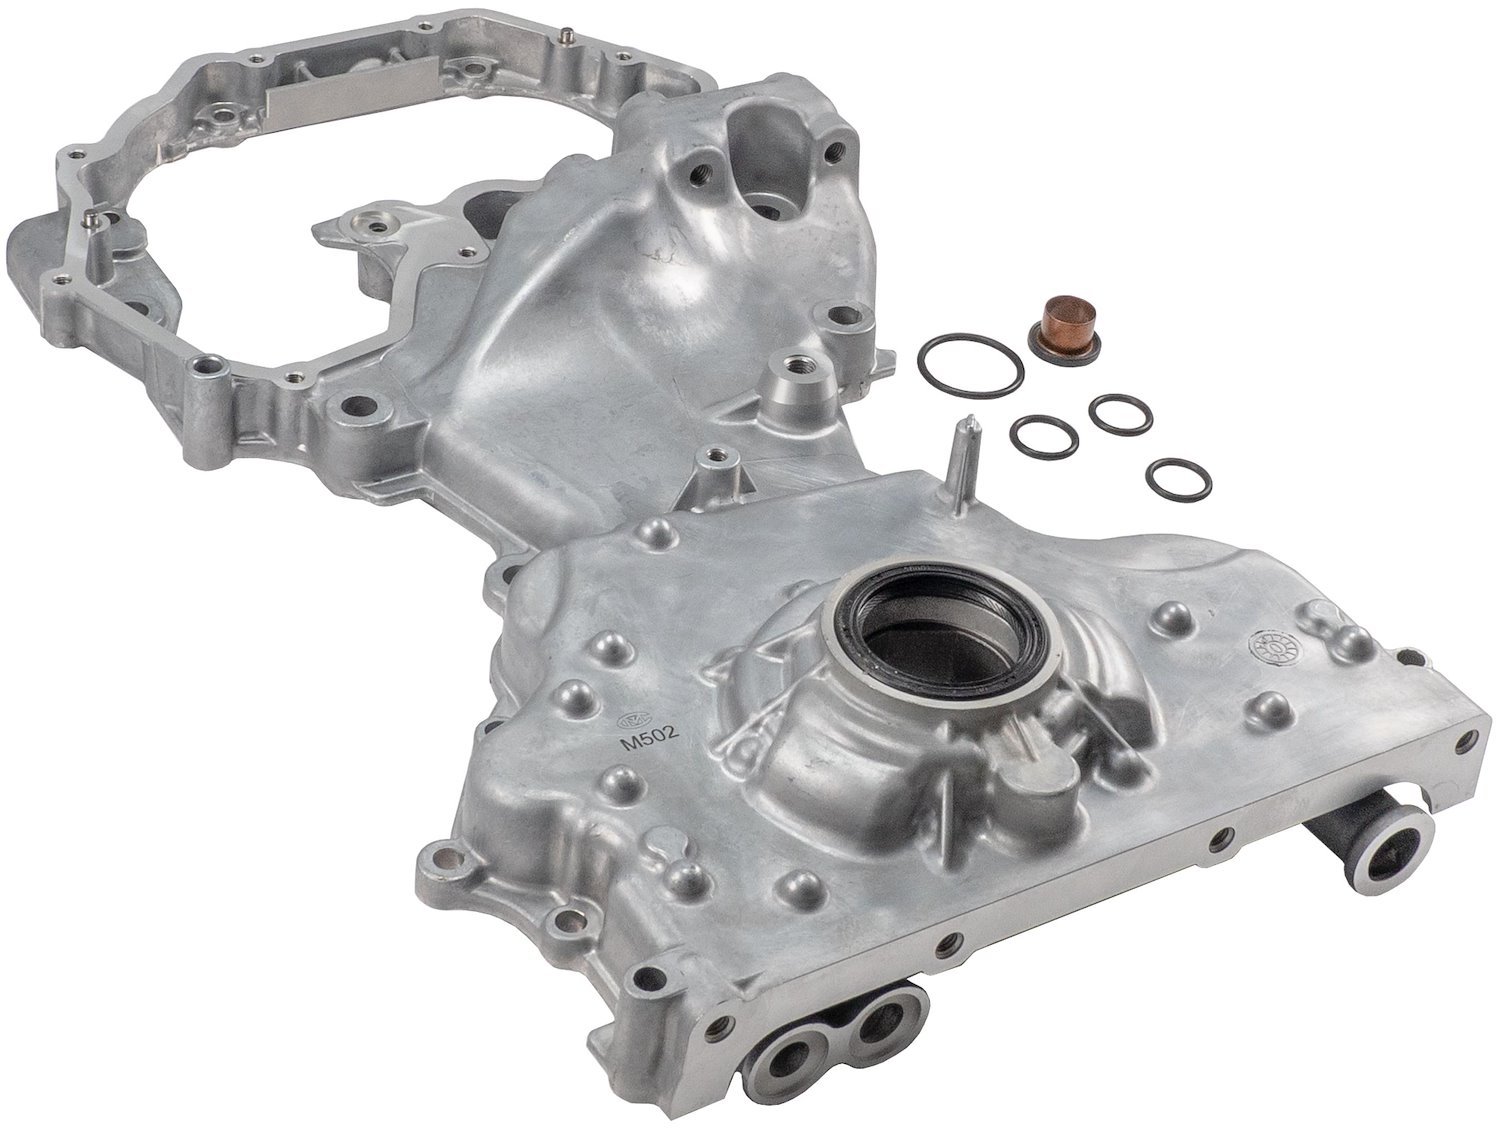 Oil Pump and Timing Cover Assembly for Nissan 2.5L DOHC